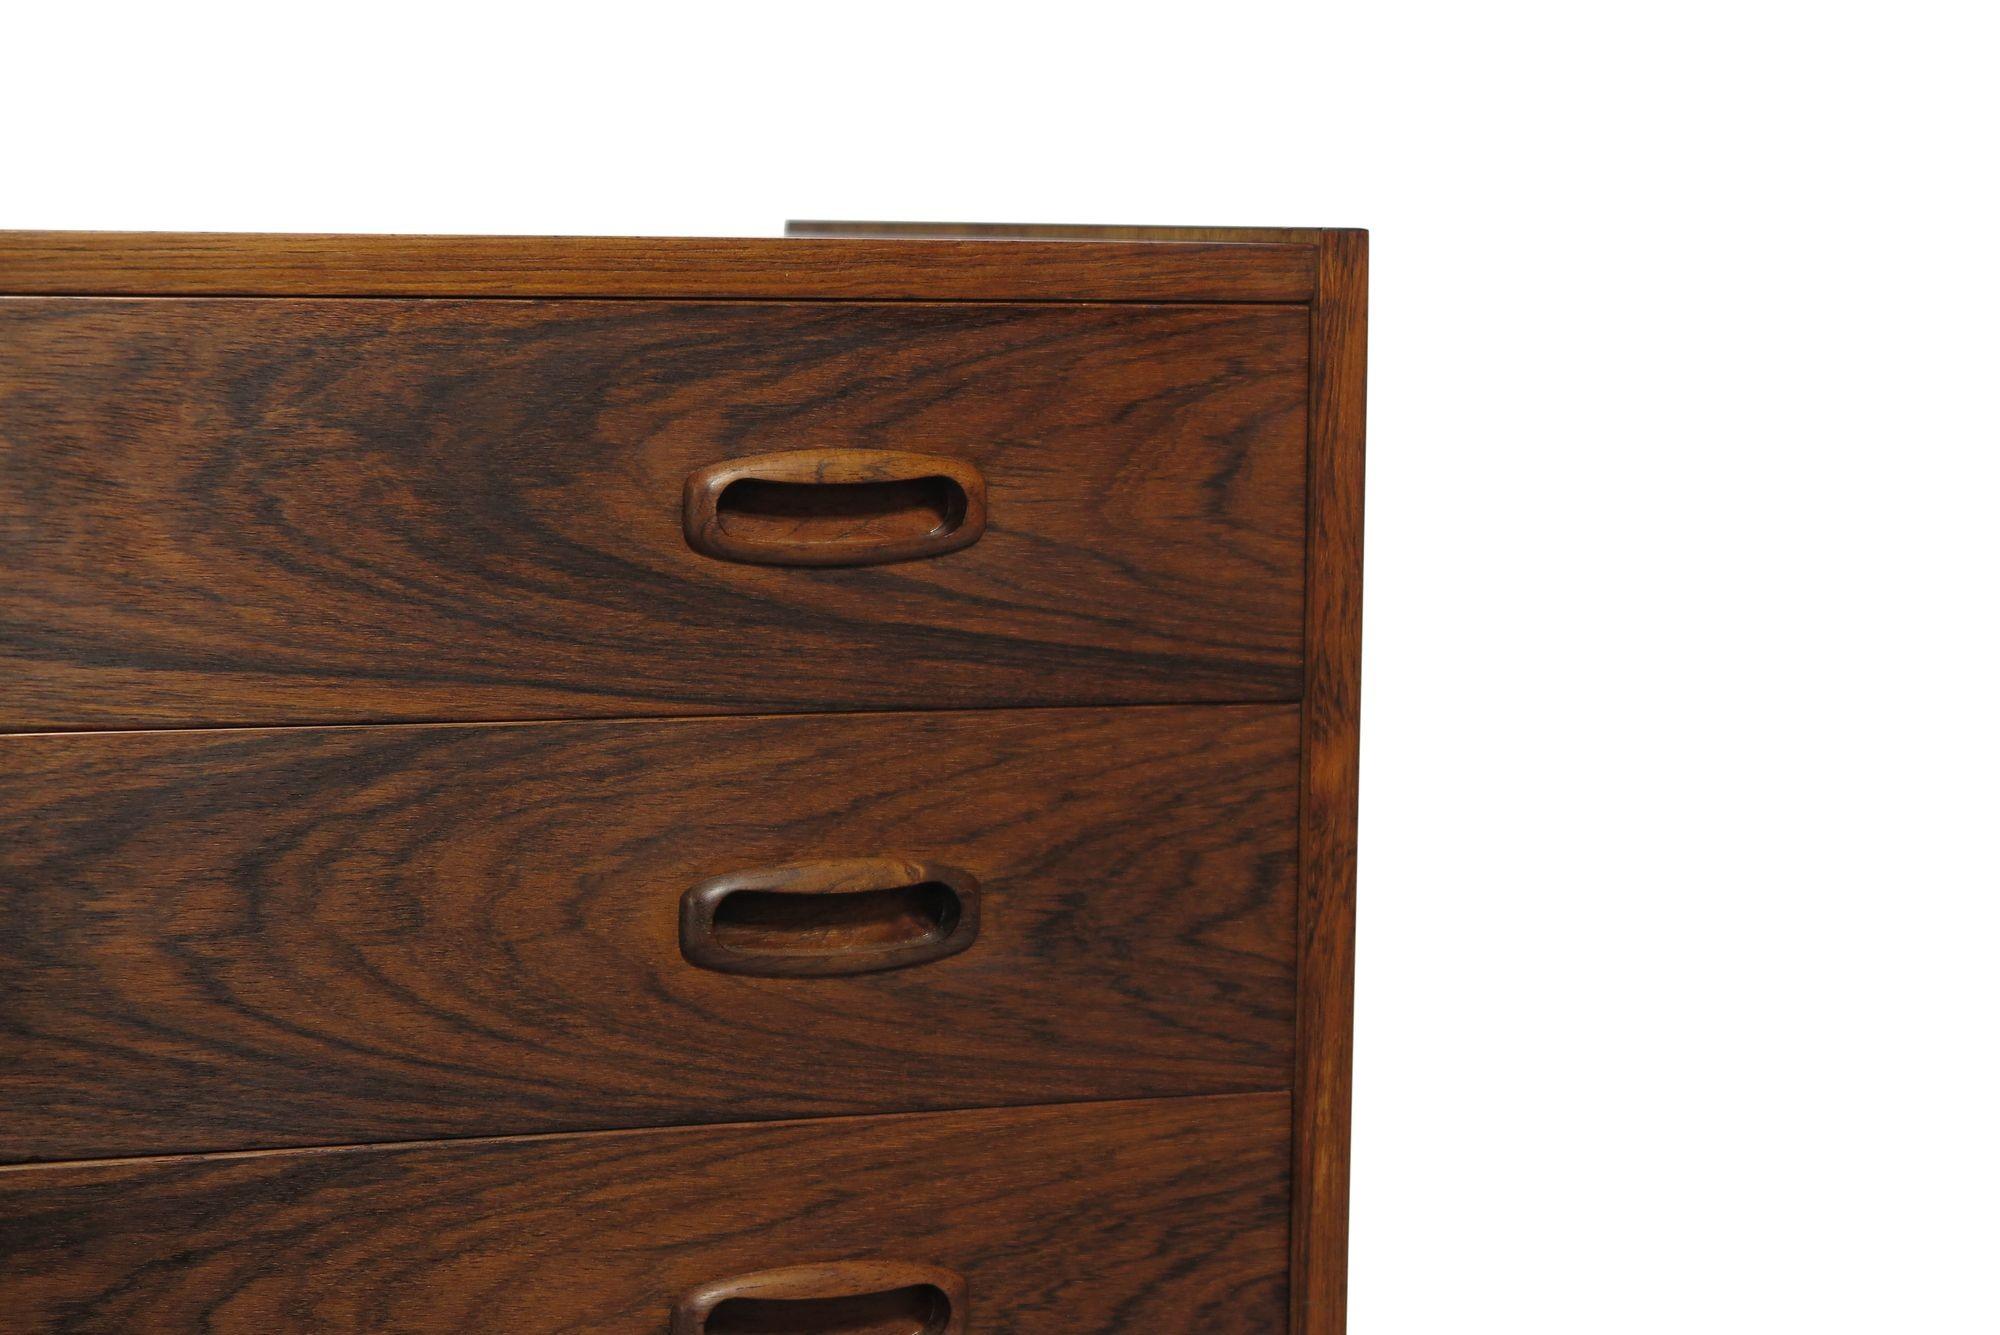 Four drawer dresser crafted in Brazilian rosewood with book-matched grain and raised on tapered legs. Finely restored and in excellent condition.
Measurements
Width 32.50’’ x Depth 16.33’’ x Height 26.75’’